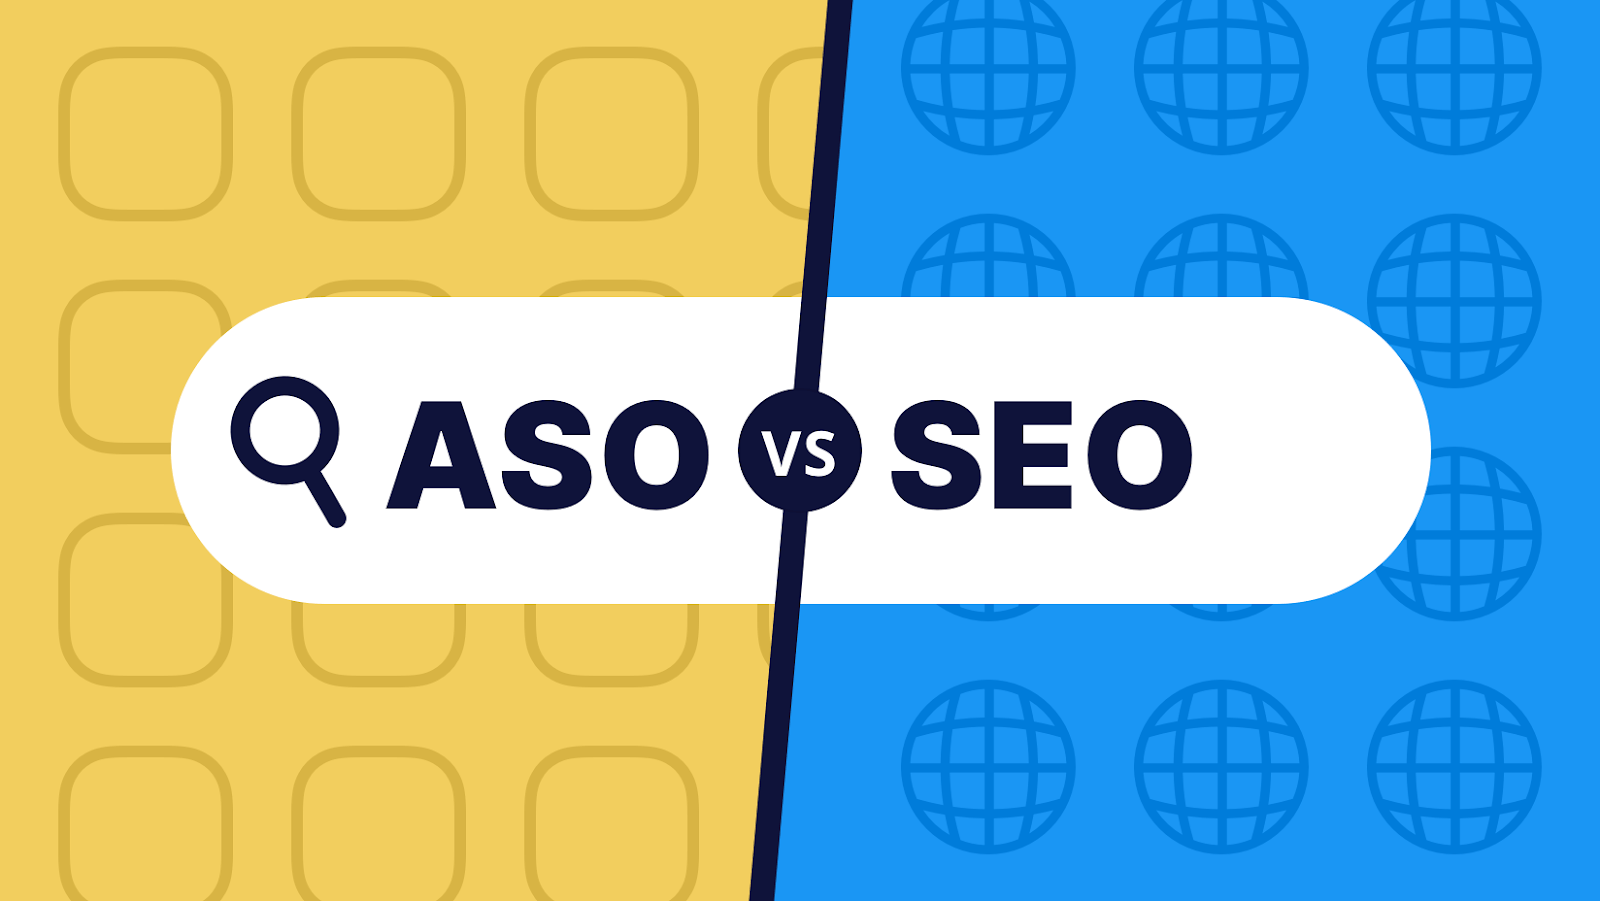 The Contrast between ASO and SEO